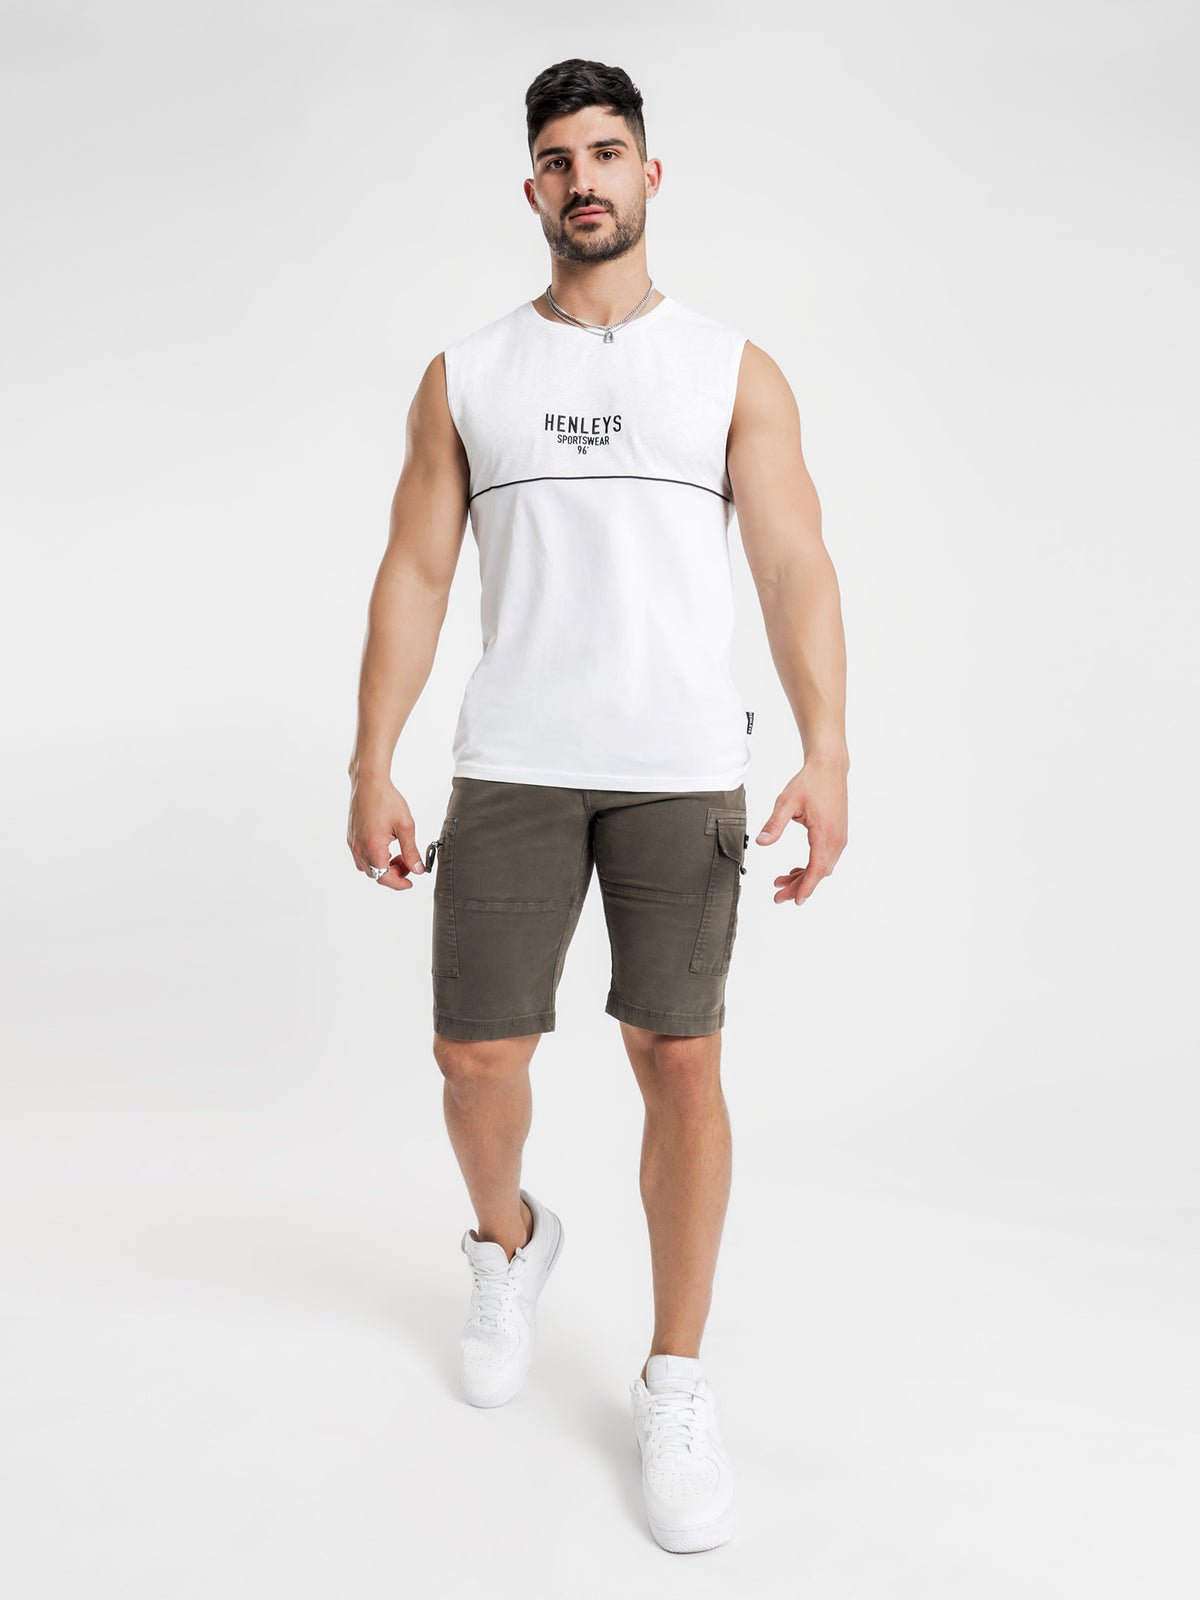 Align Muscle T-Shirt in Snow Marle